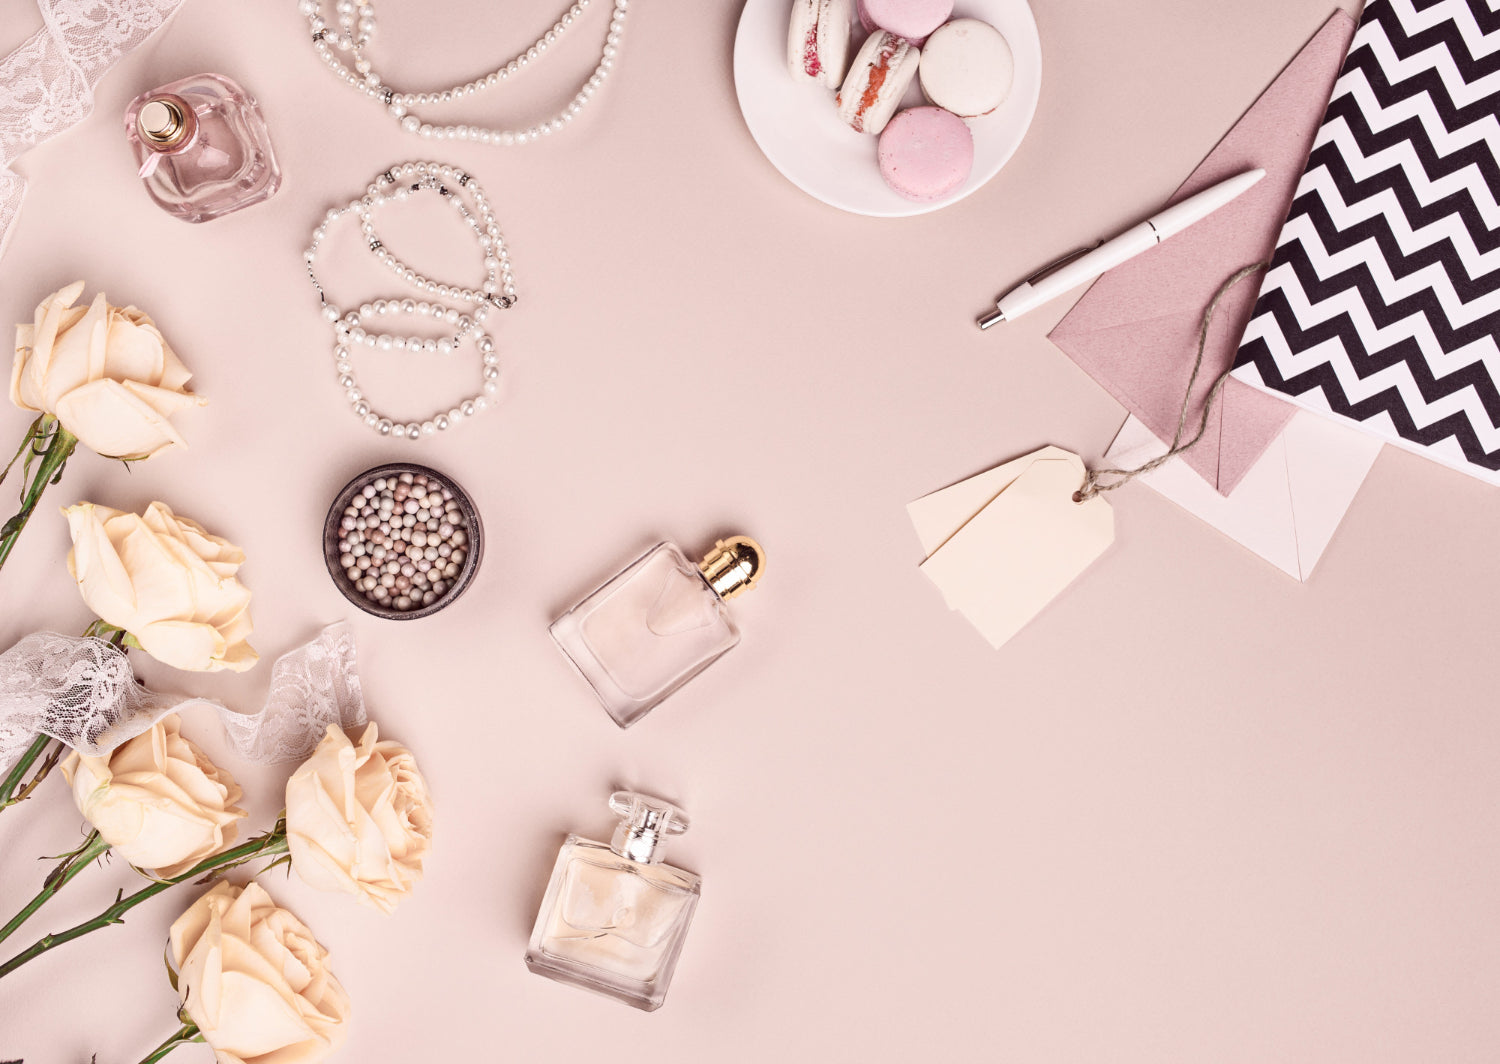 New Must-Have Perfume Launches 2020 Season